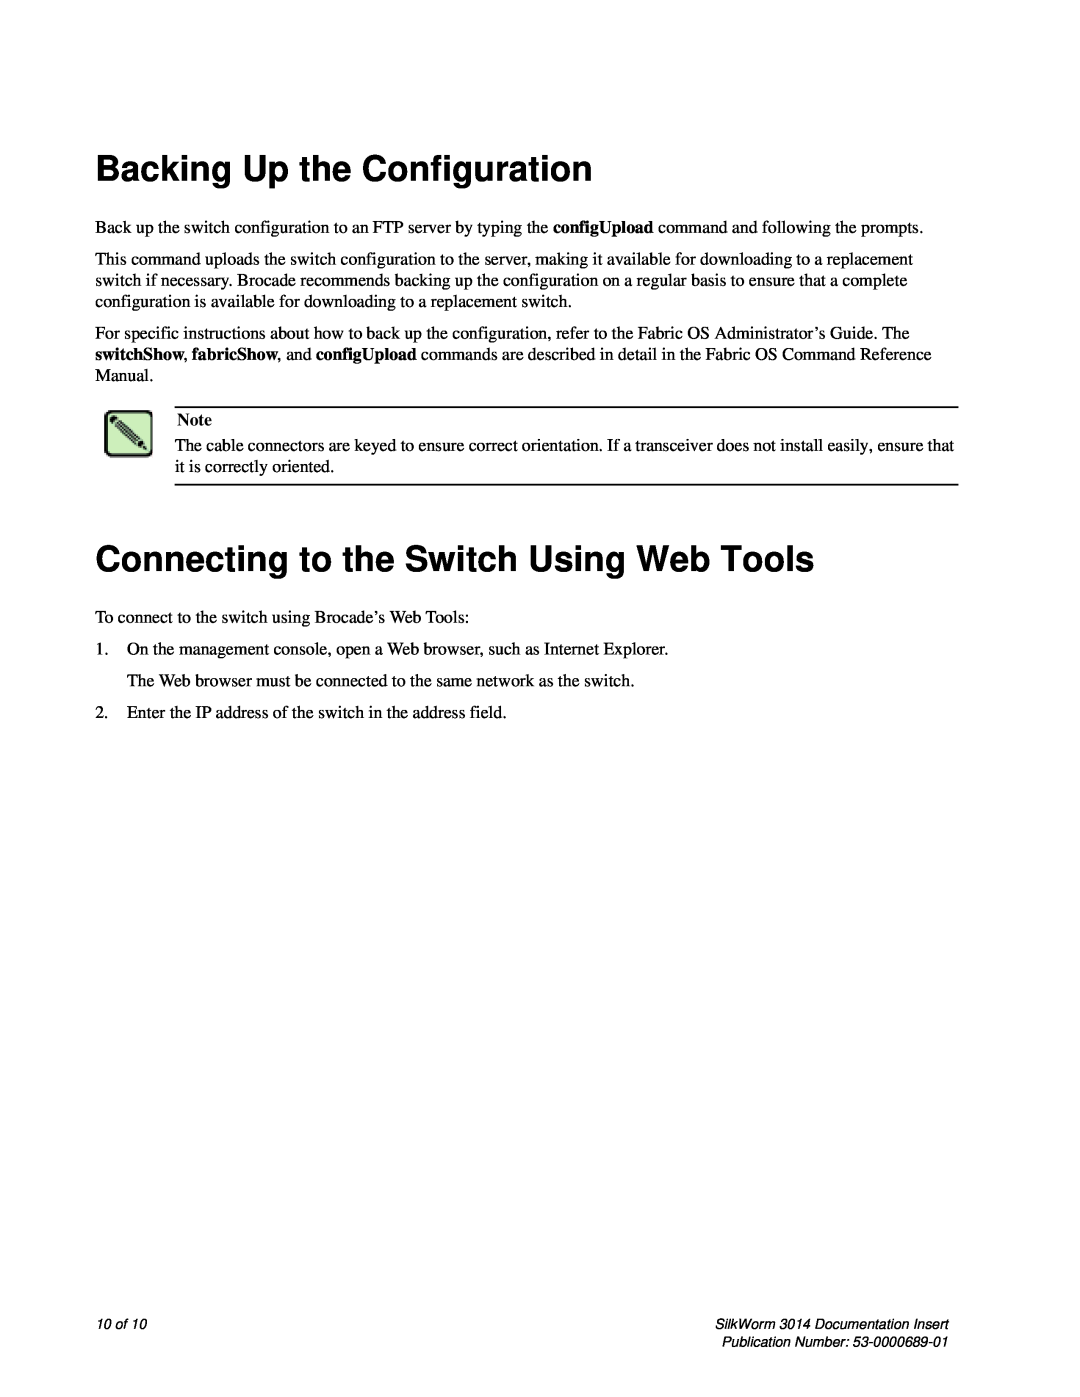 Brocade Communications Systems 3014 quick start Backing Up the Configuration, Connecting to the Switch Using Web Tools 